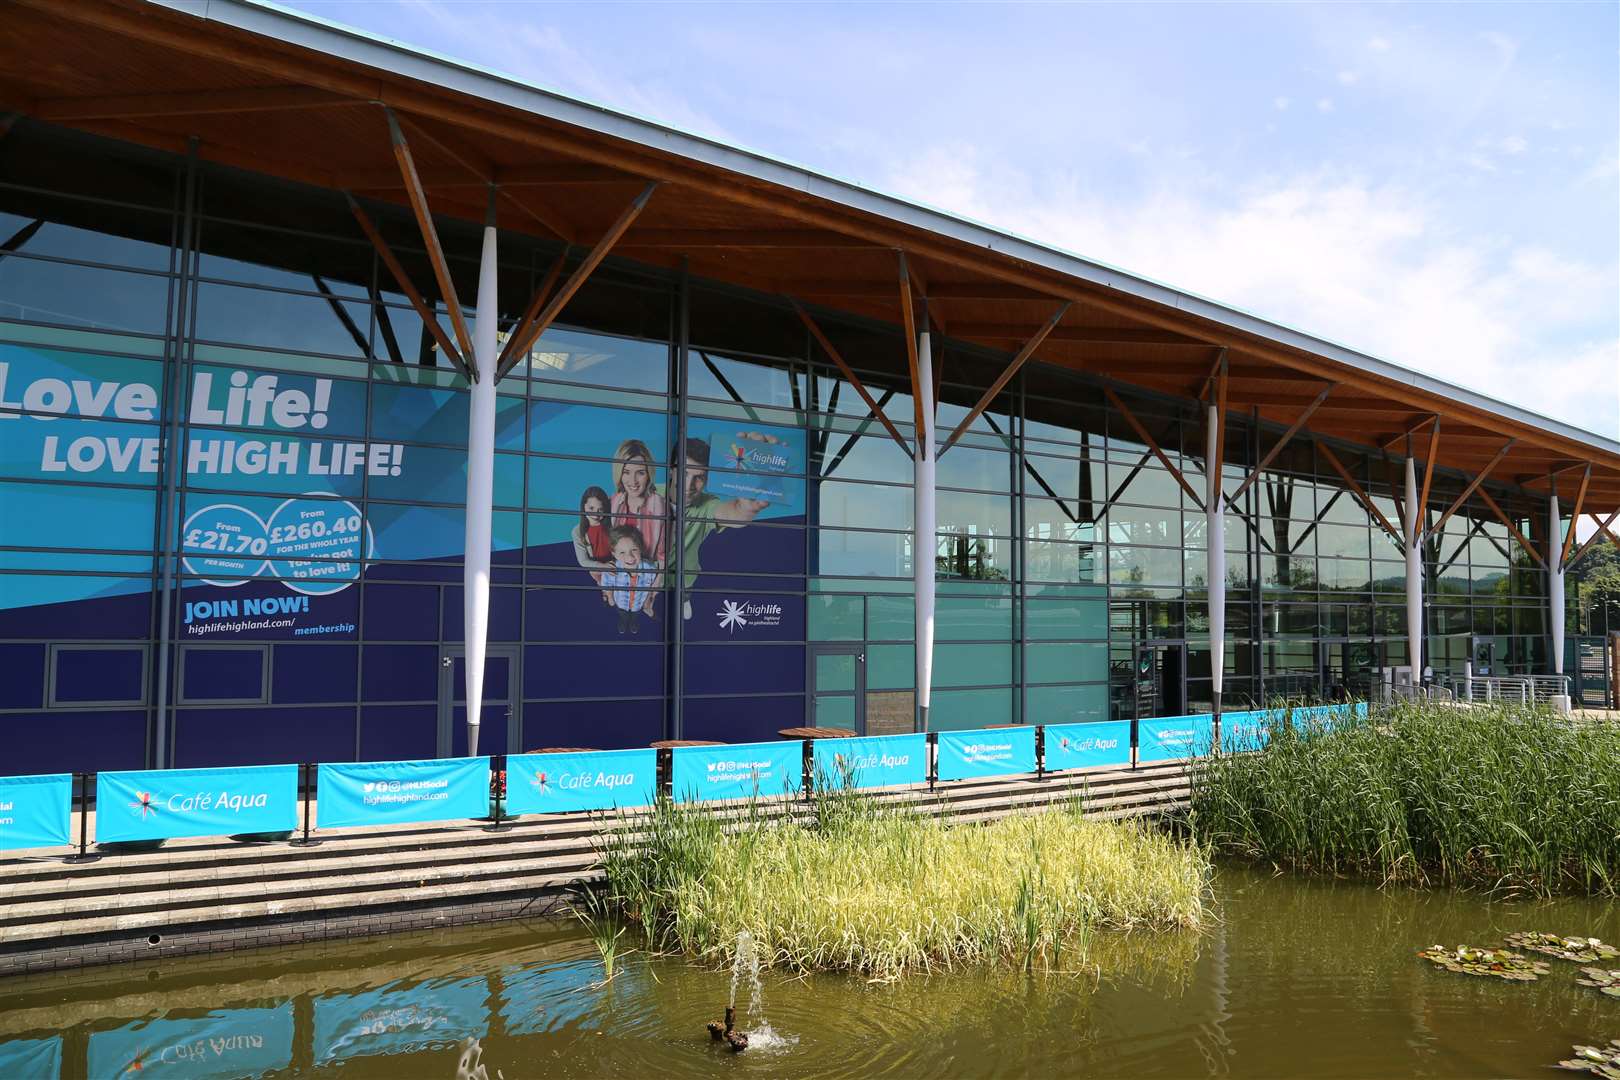 Inverness Leisure Centre where Café Aqua has opened beside the leisure waters.